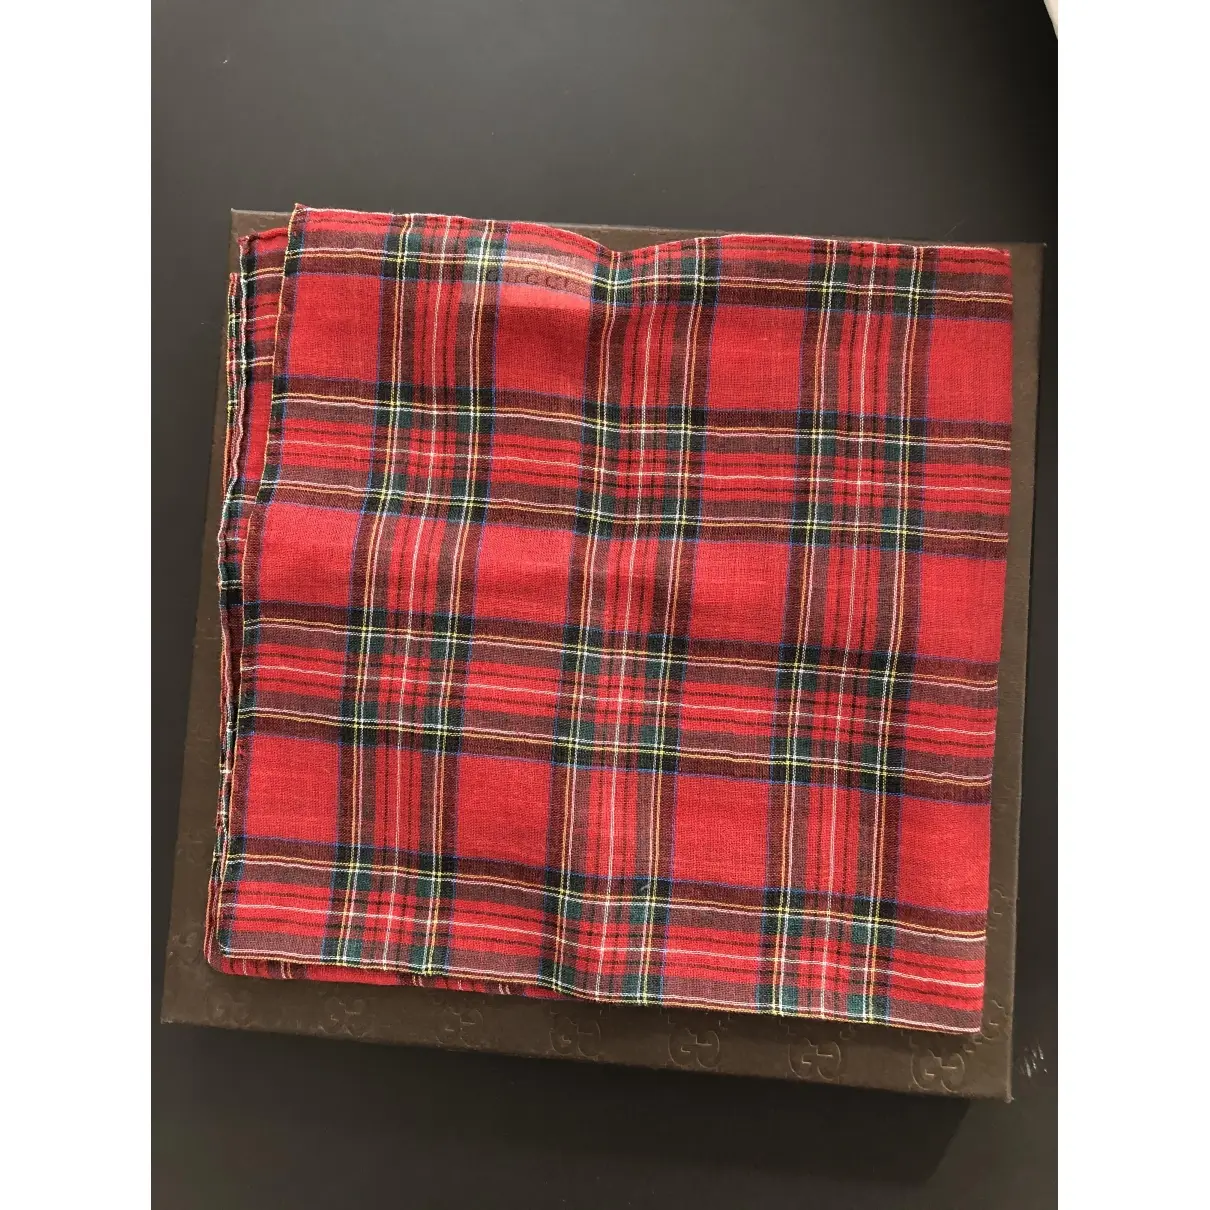 Gucci Wool scarf & pocket square for sale